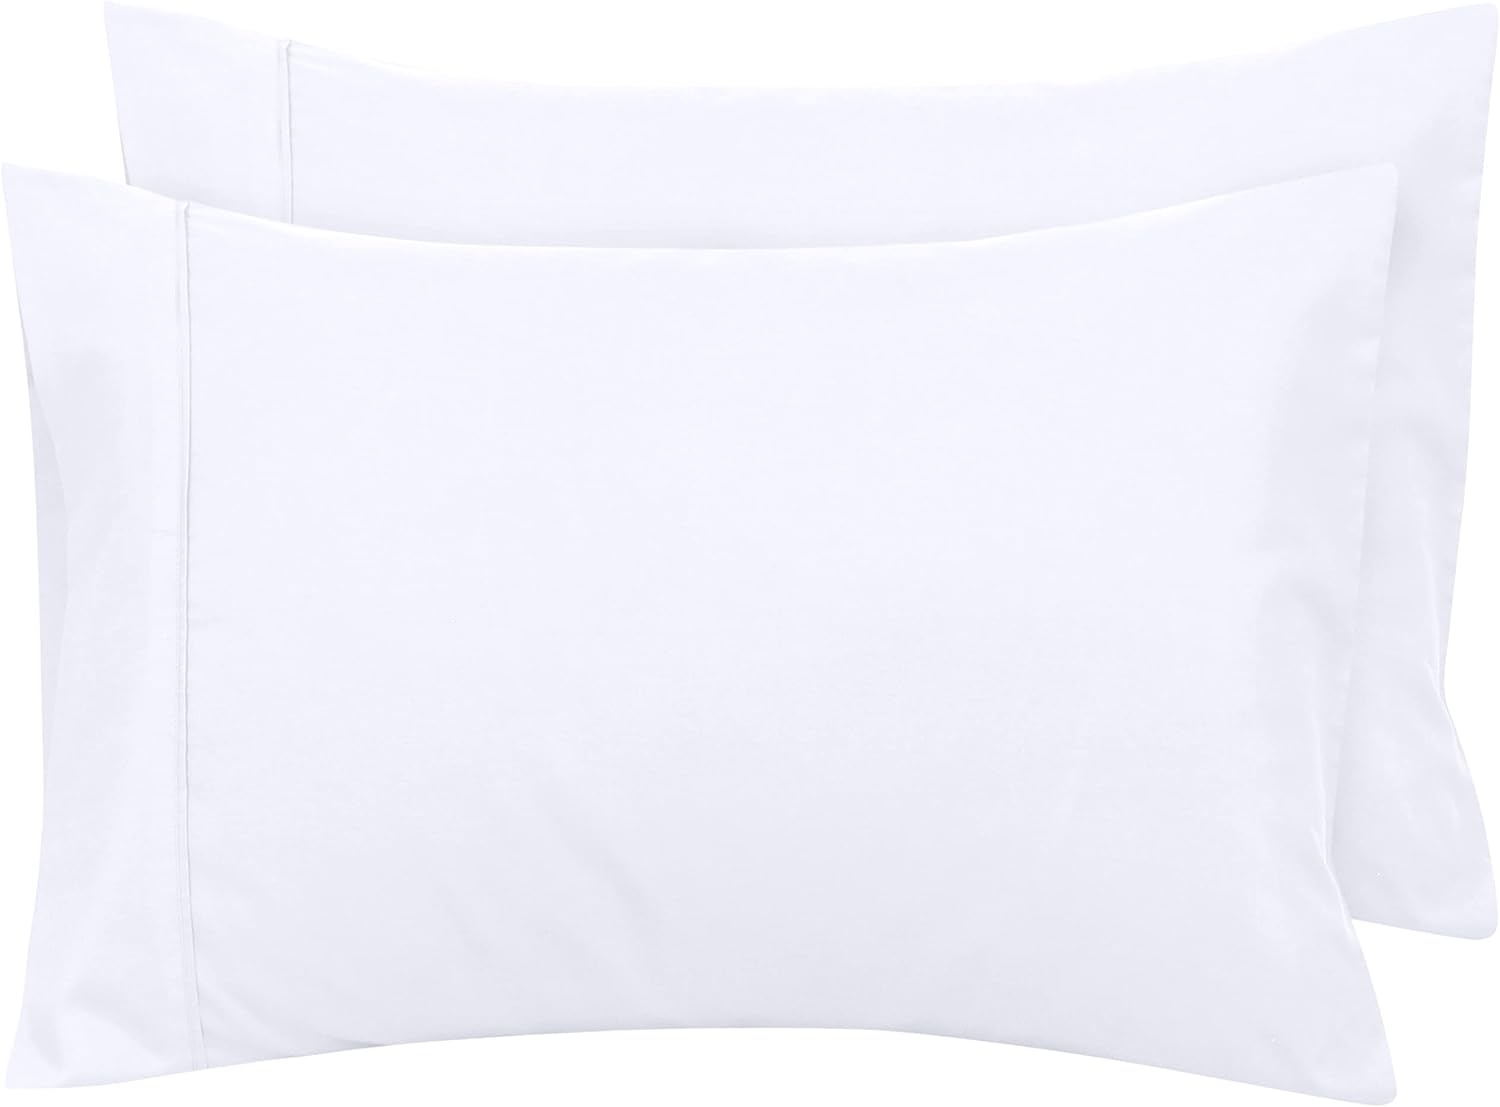 Royale Linens Standard Pillowcase Set of 2 - 20"x26" White Pillowcases - 1800 Brushed Microfiber, Wrinkle & Fade Resistant - Soft & Cozy